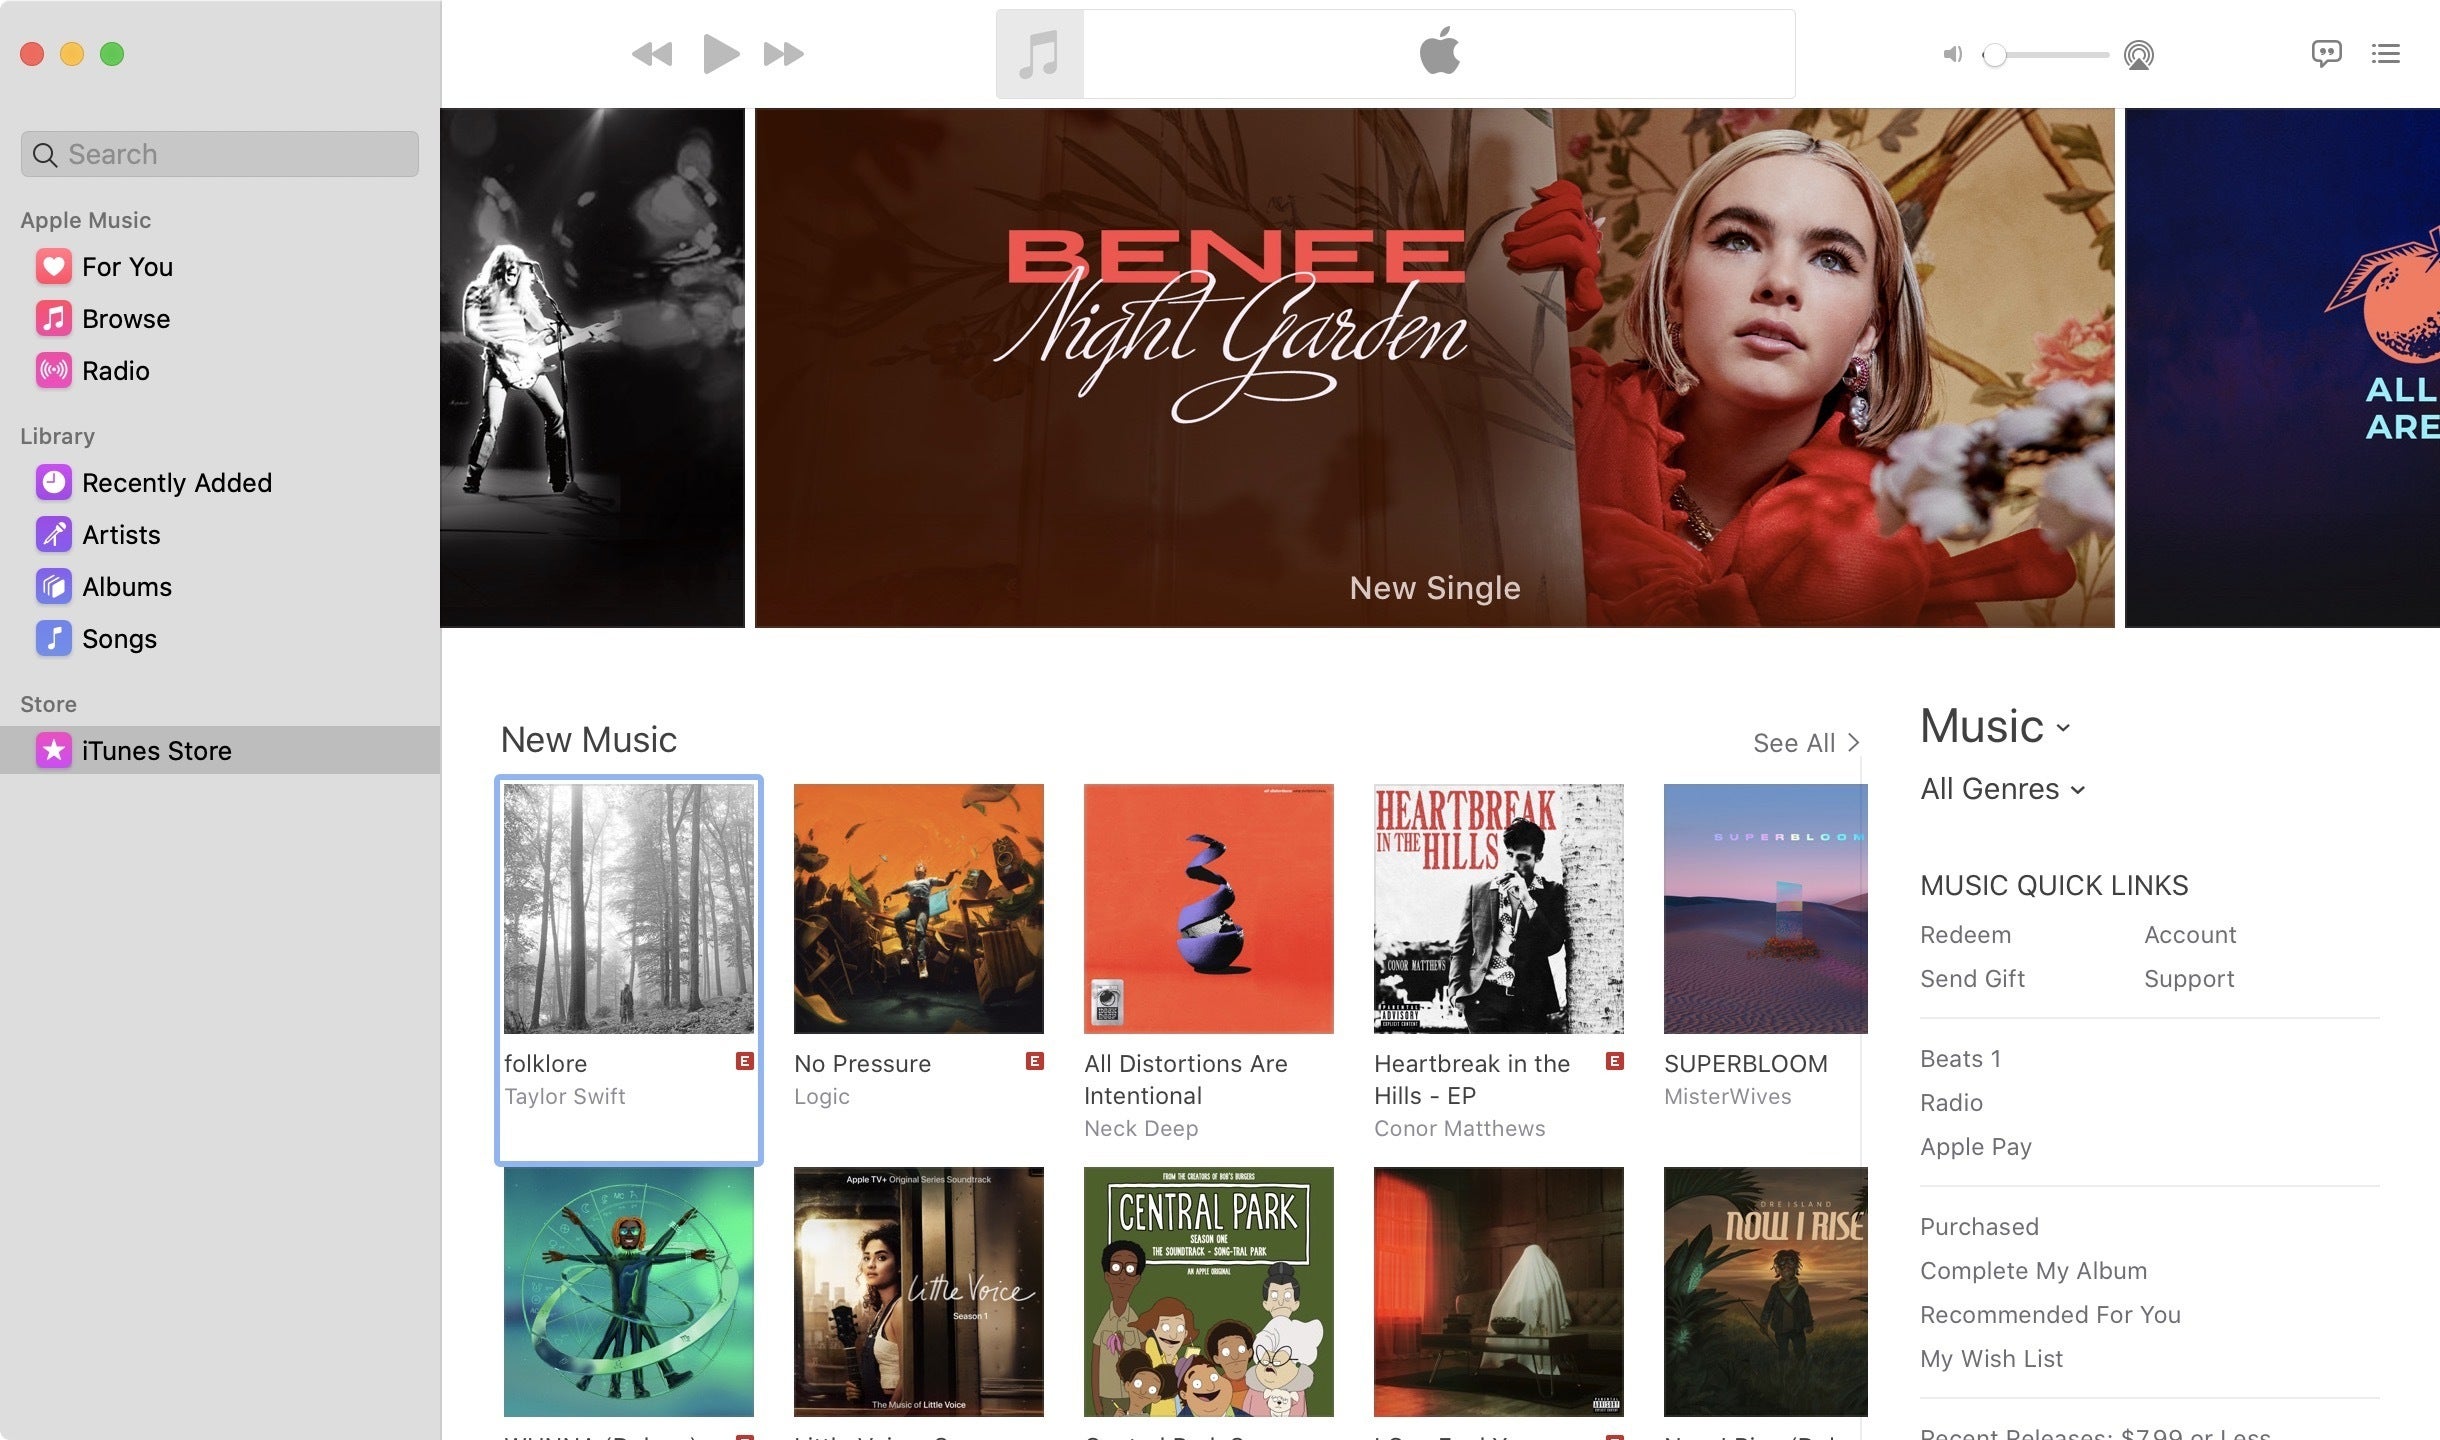 Apple Music FAQ: The ins and outs of Apple’s streaming music service